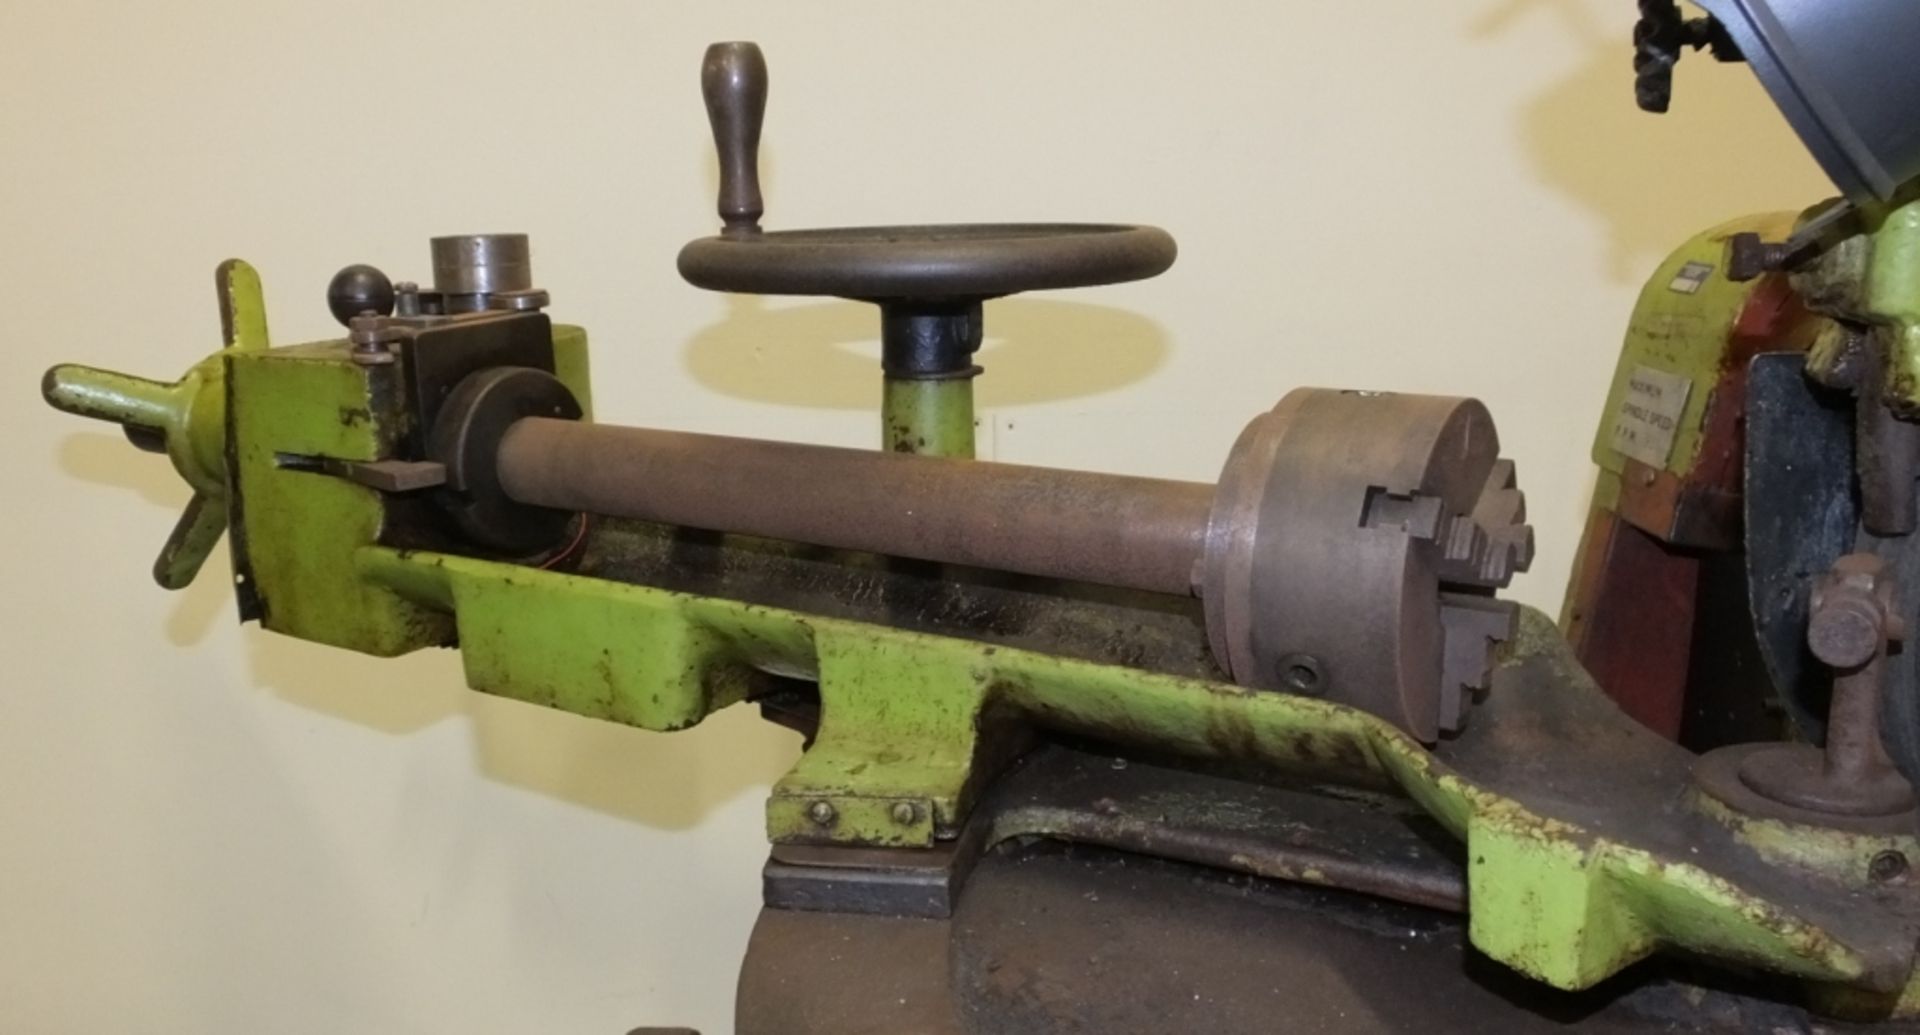 Herbert Hunt & Sons Drill Sharpening Machine - £5 Loading Charge Applied to this lot - Image 2 of 6